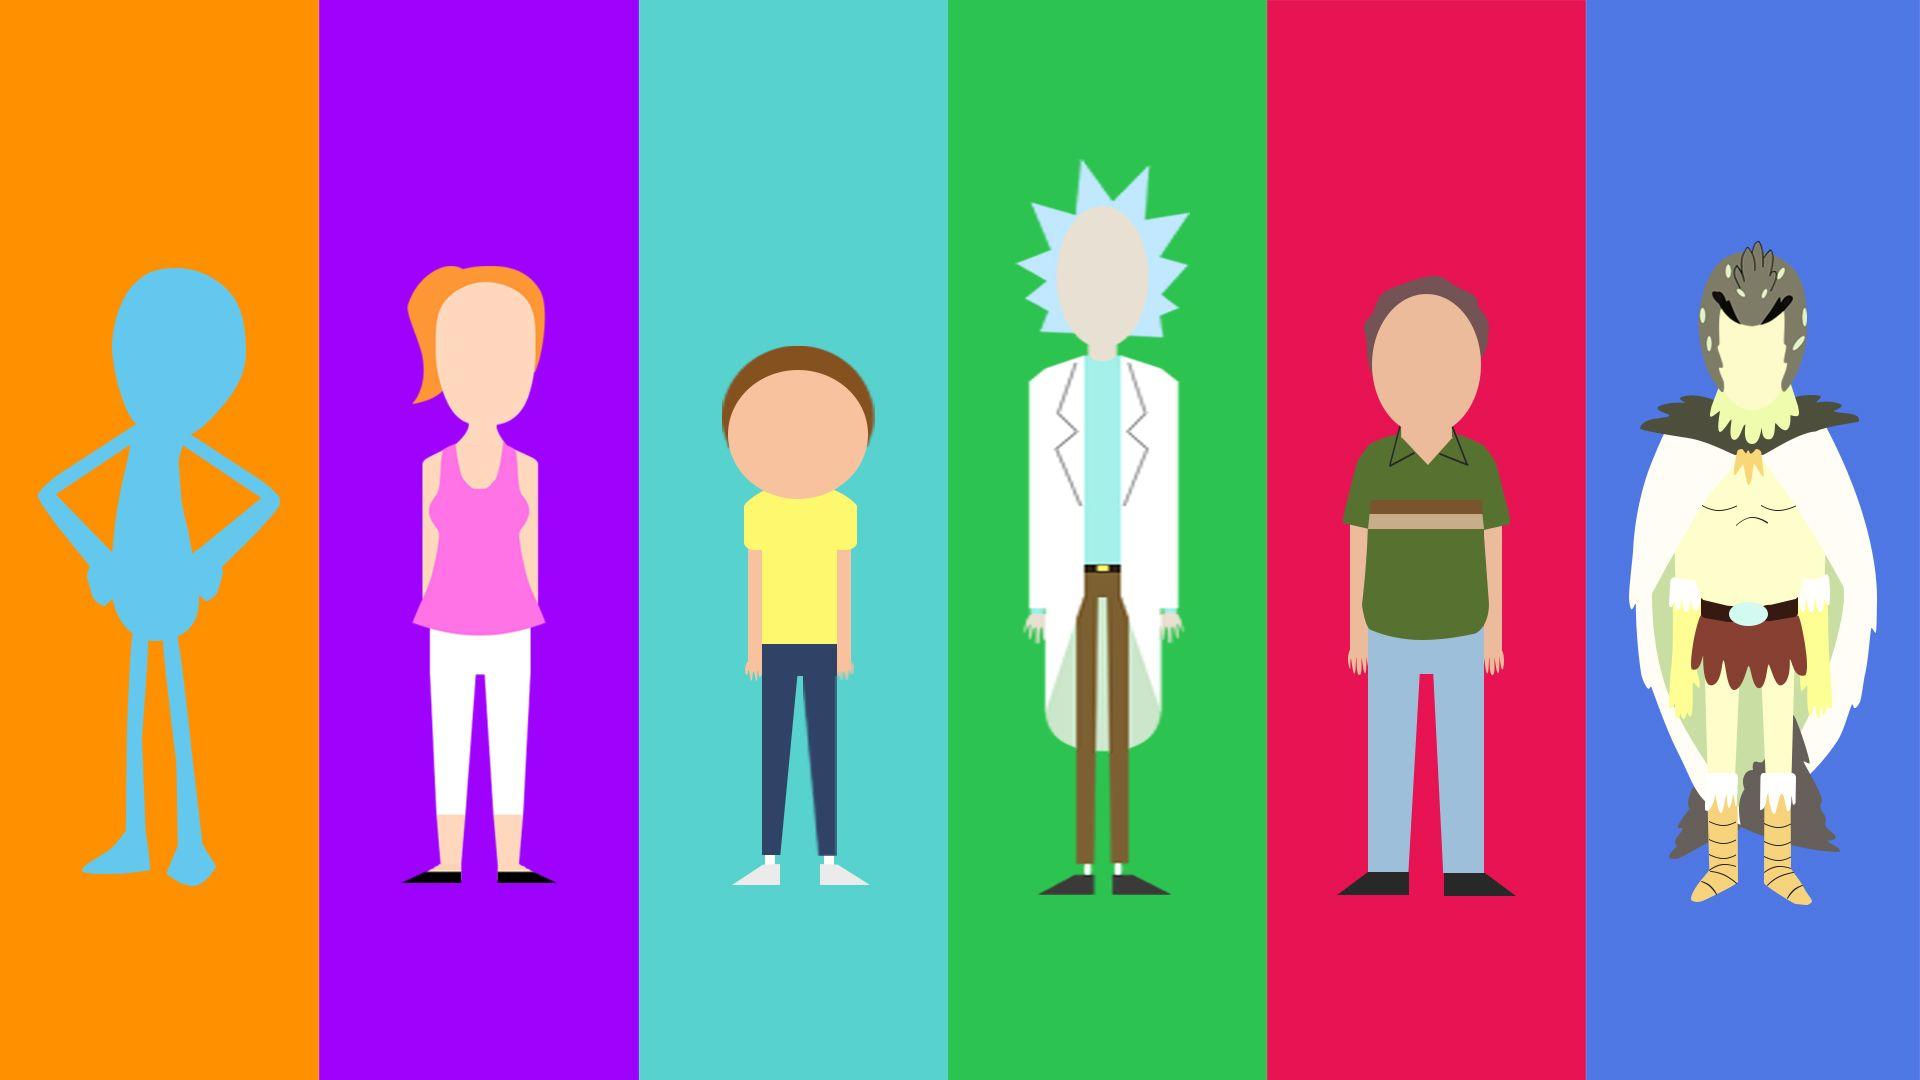 My minimalist Rick and Morty character collection [OC]